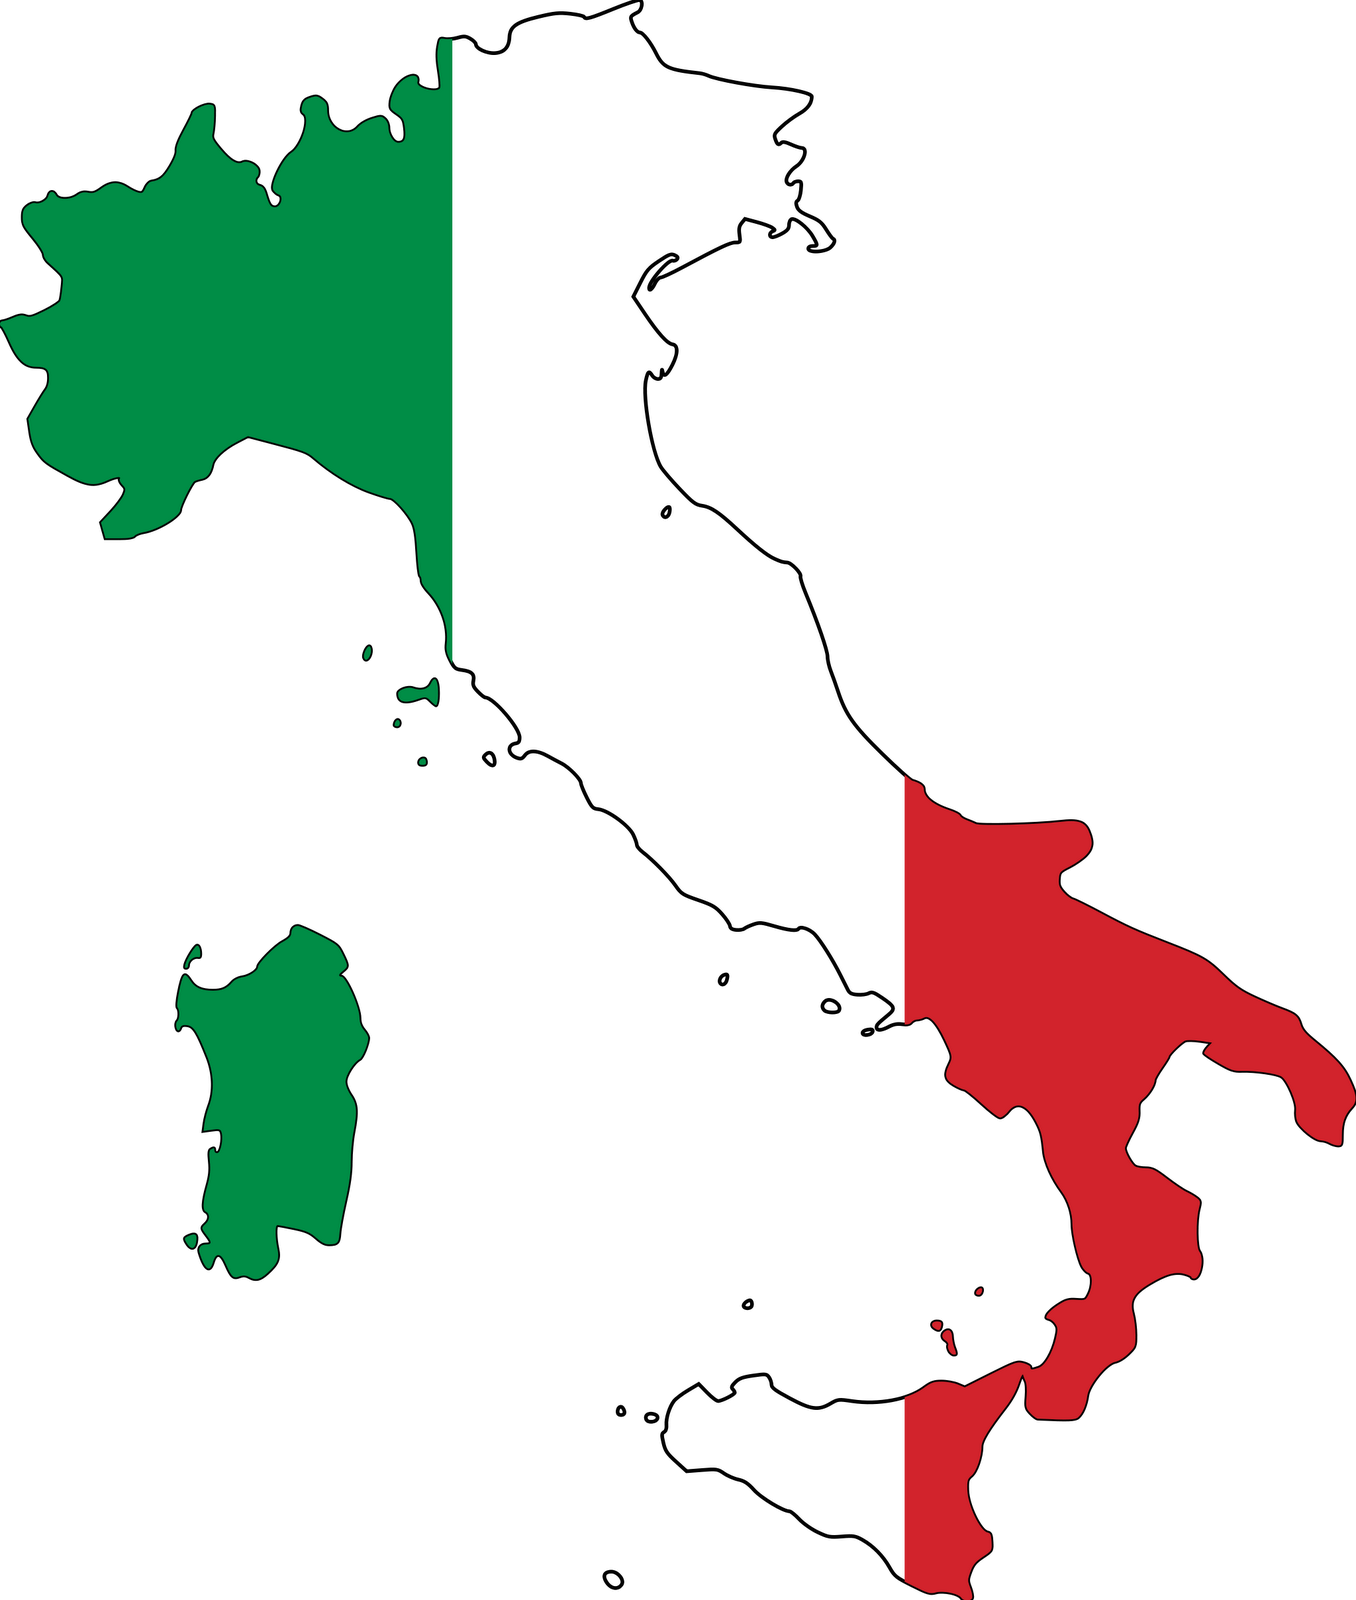 Italy Clip Art Free | Clipart Panda - Free Clipart Images